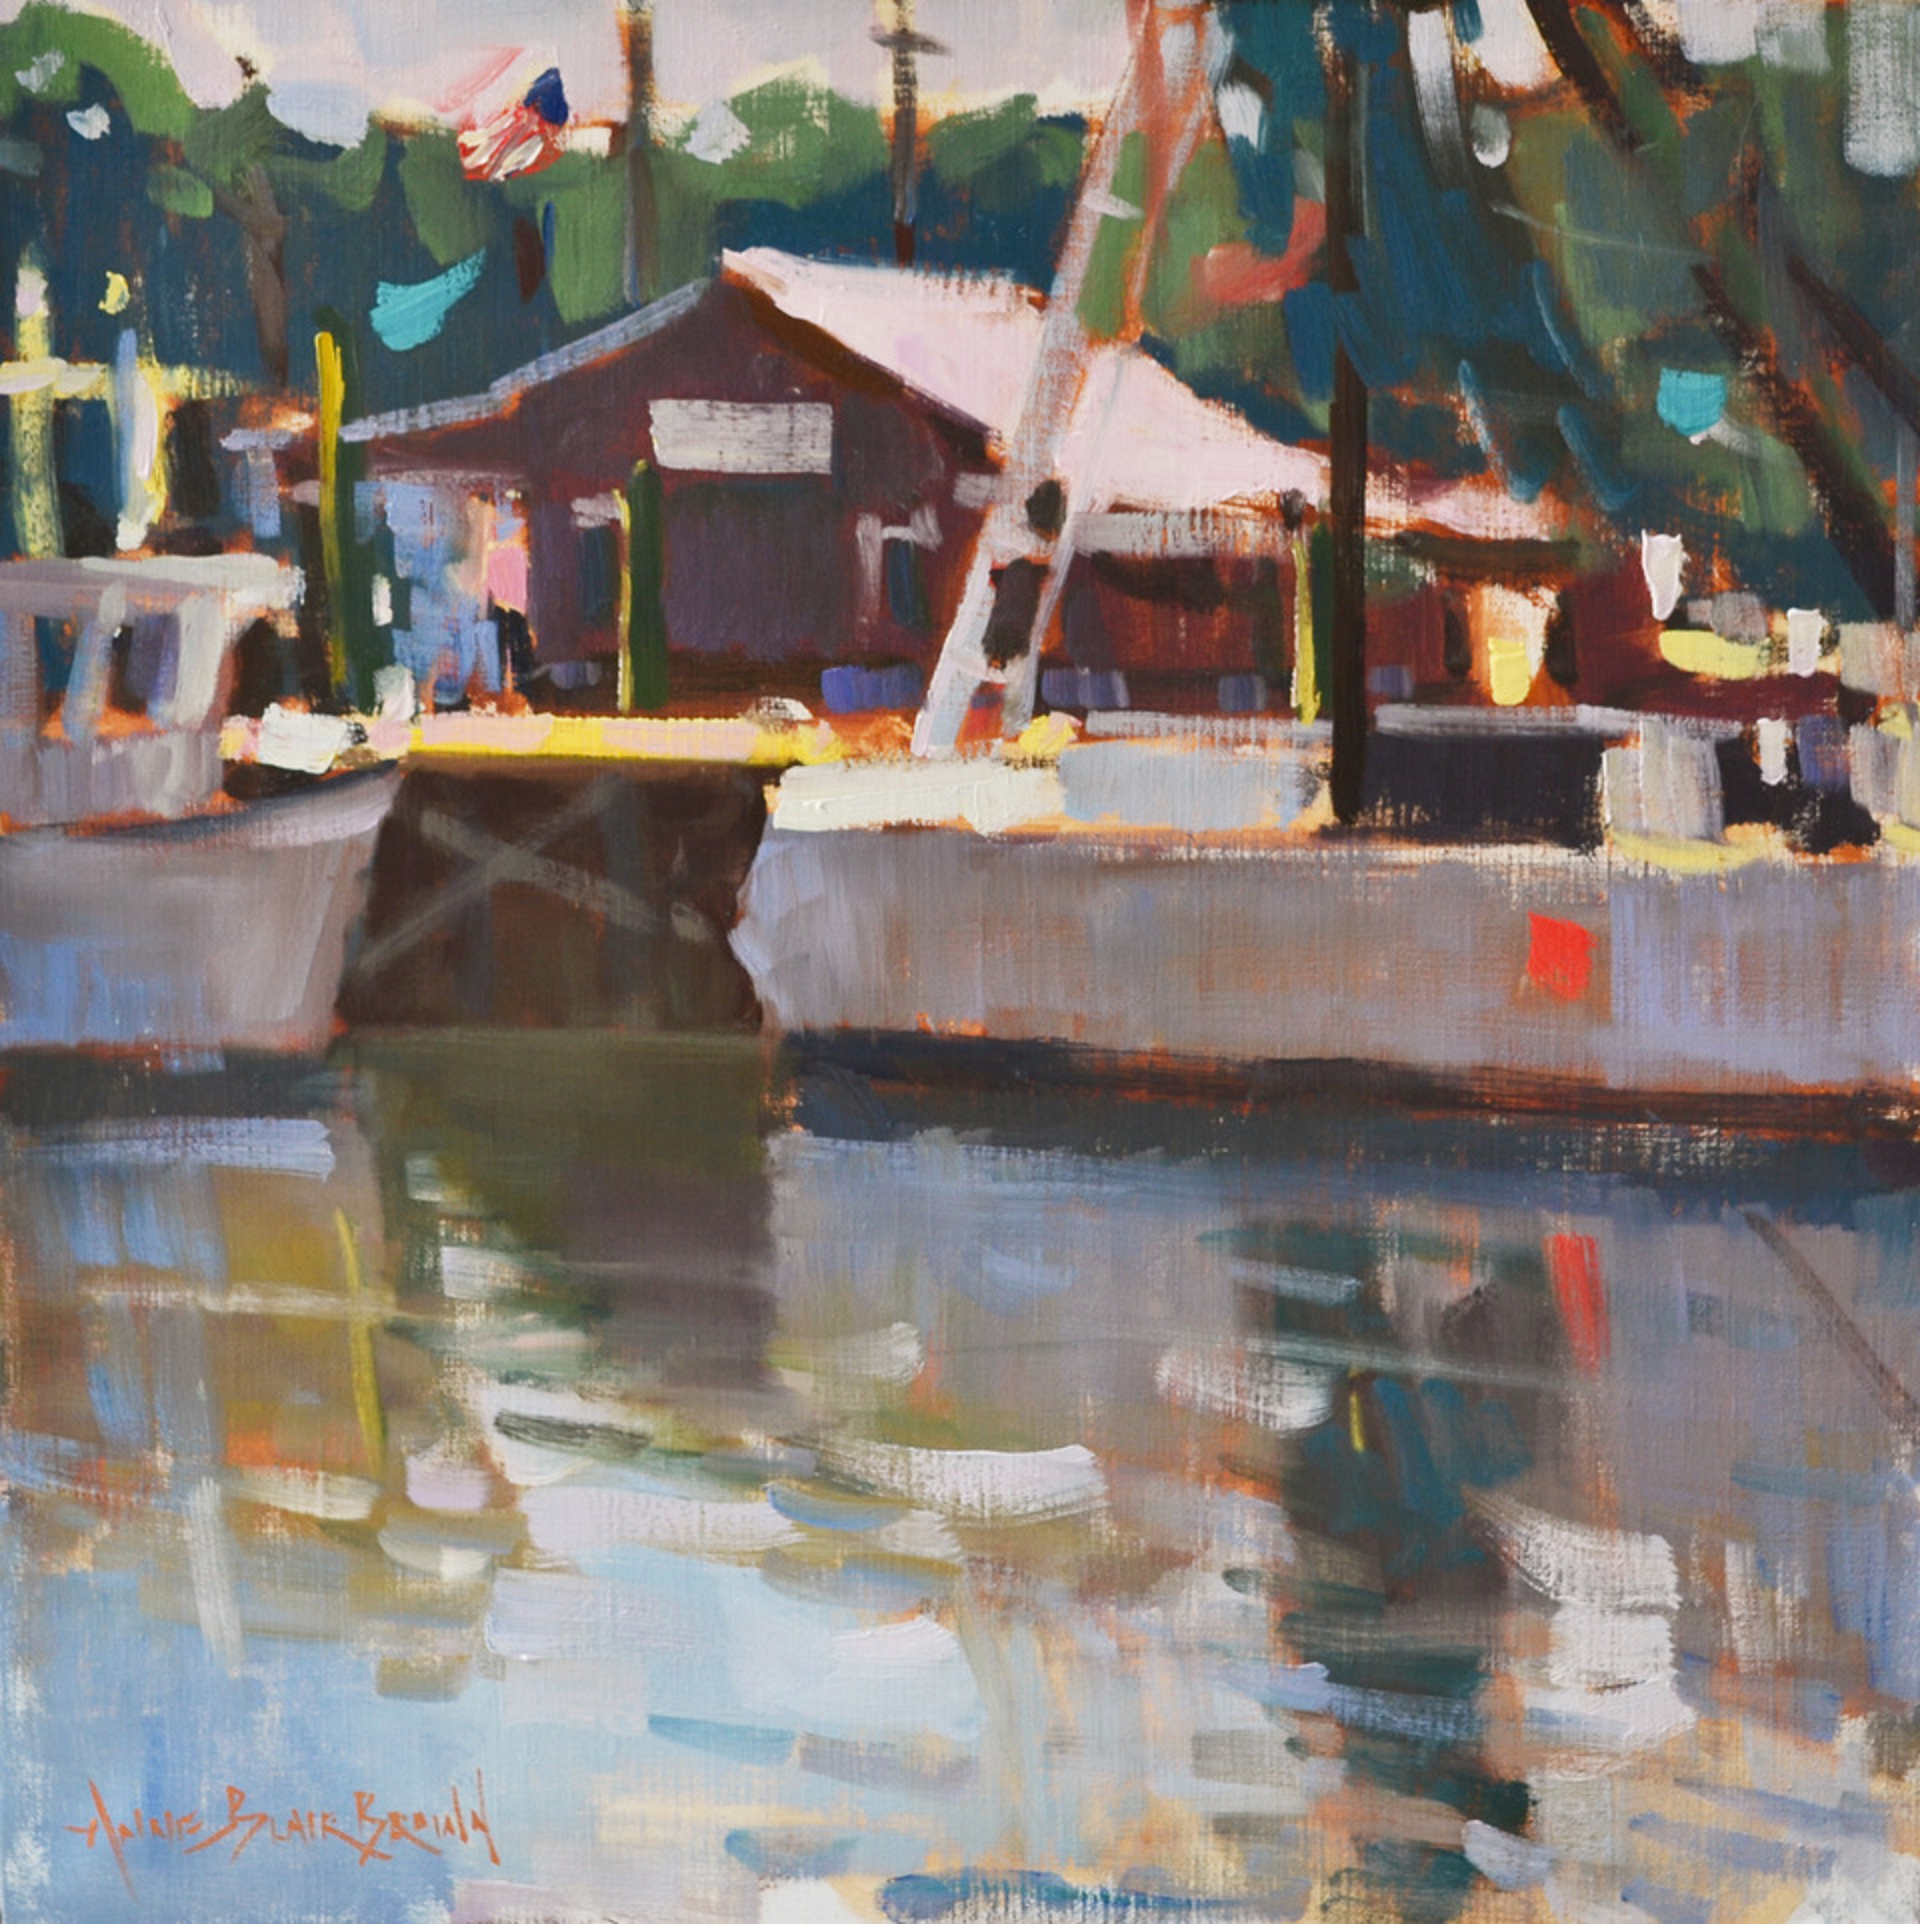 Dock Reflections by Anne Blair Brown, AIS Master